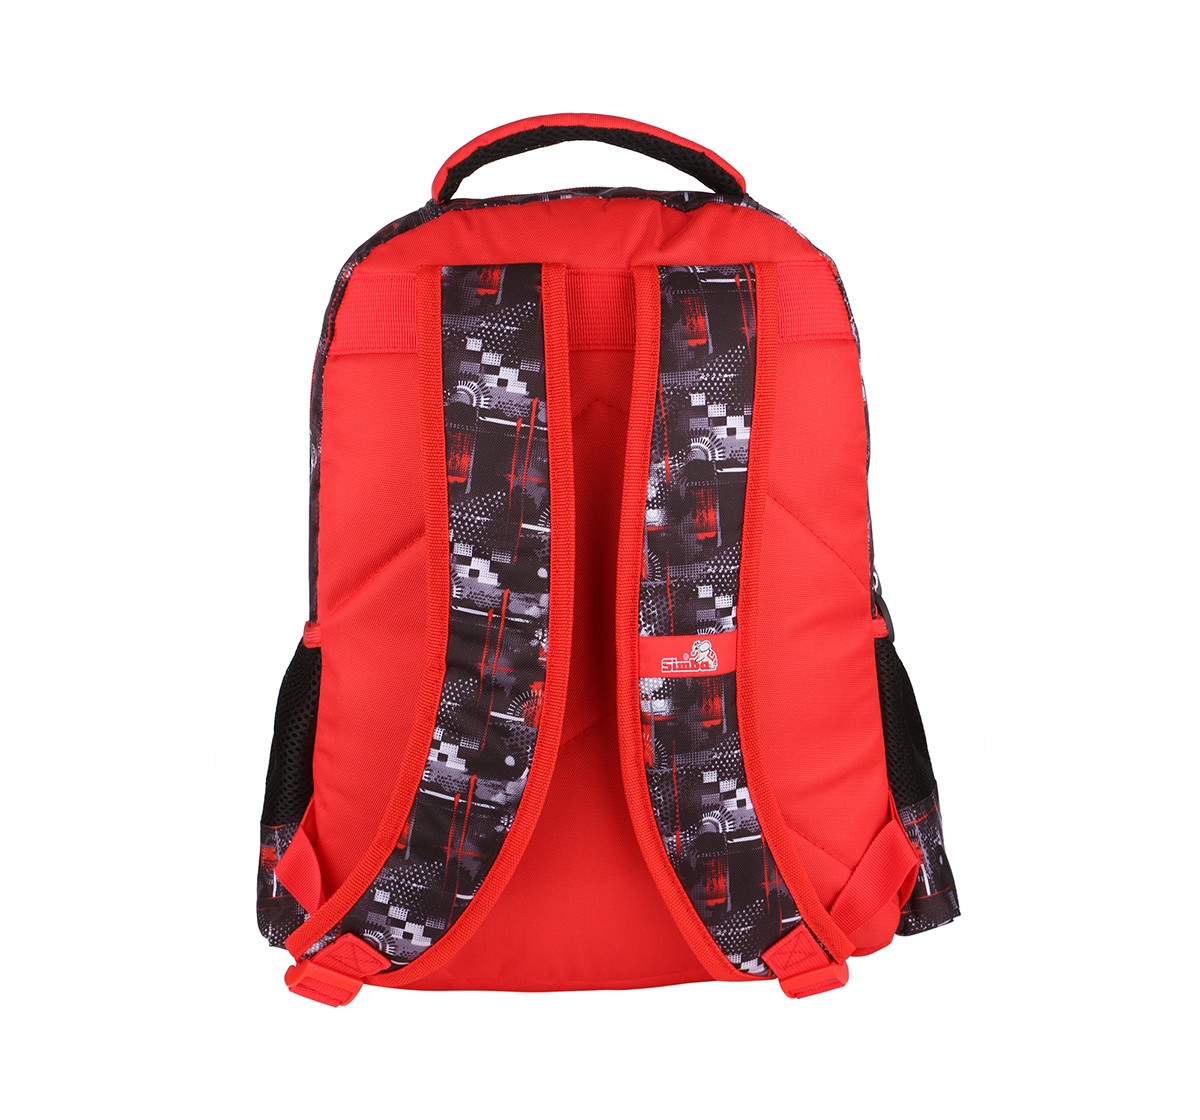  Shiva The Powerful Backpack- 16" Bags for Kids age 5Y+ (Red)